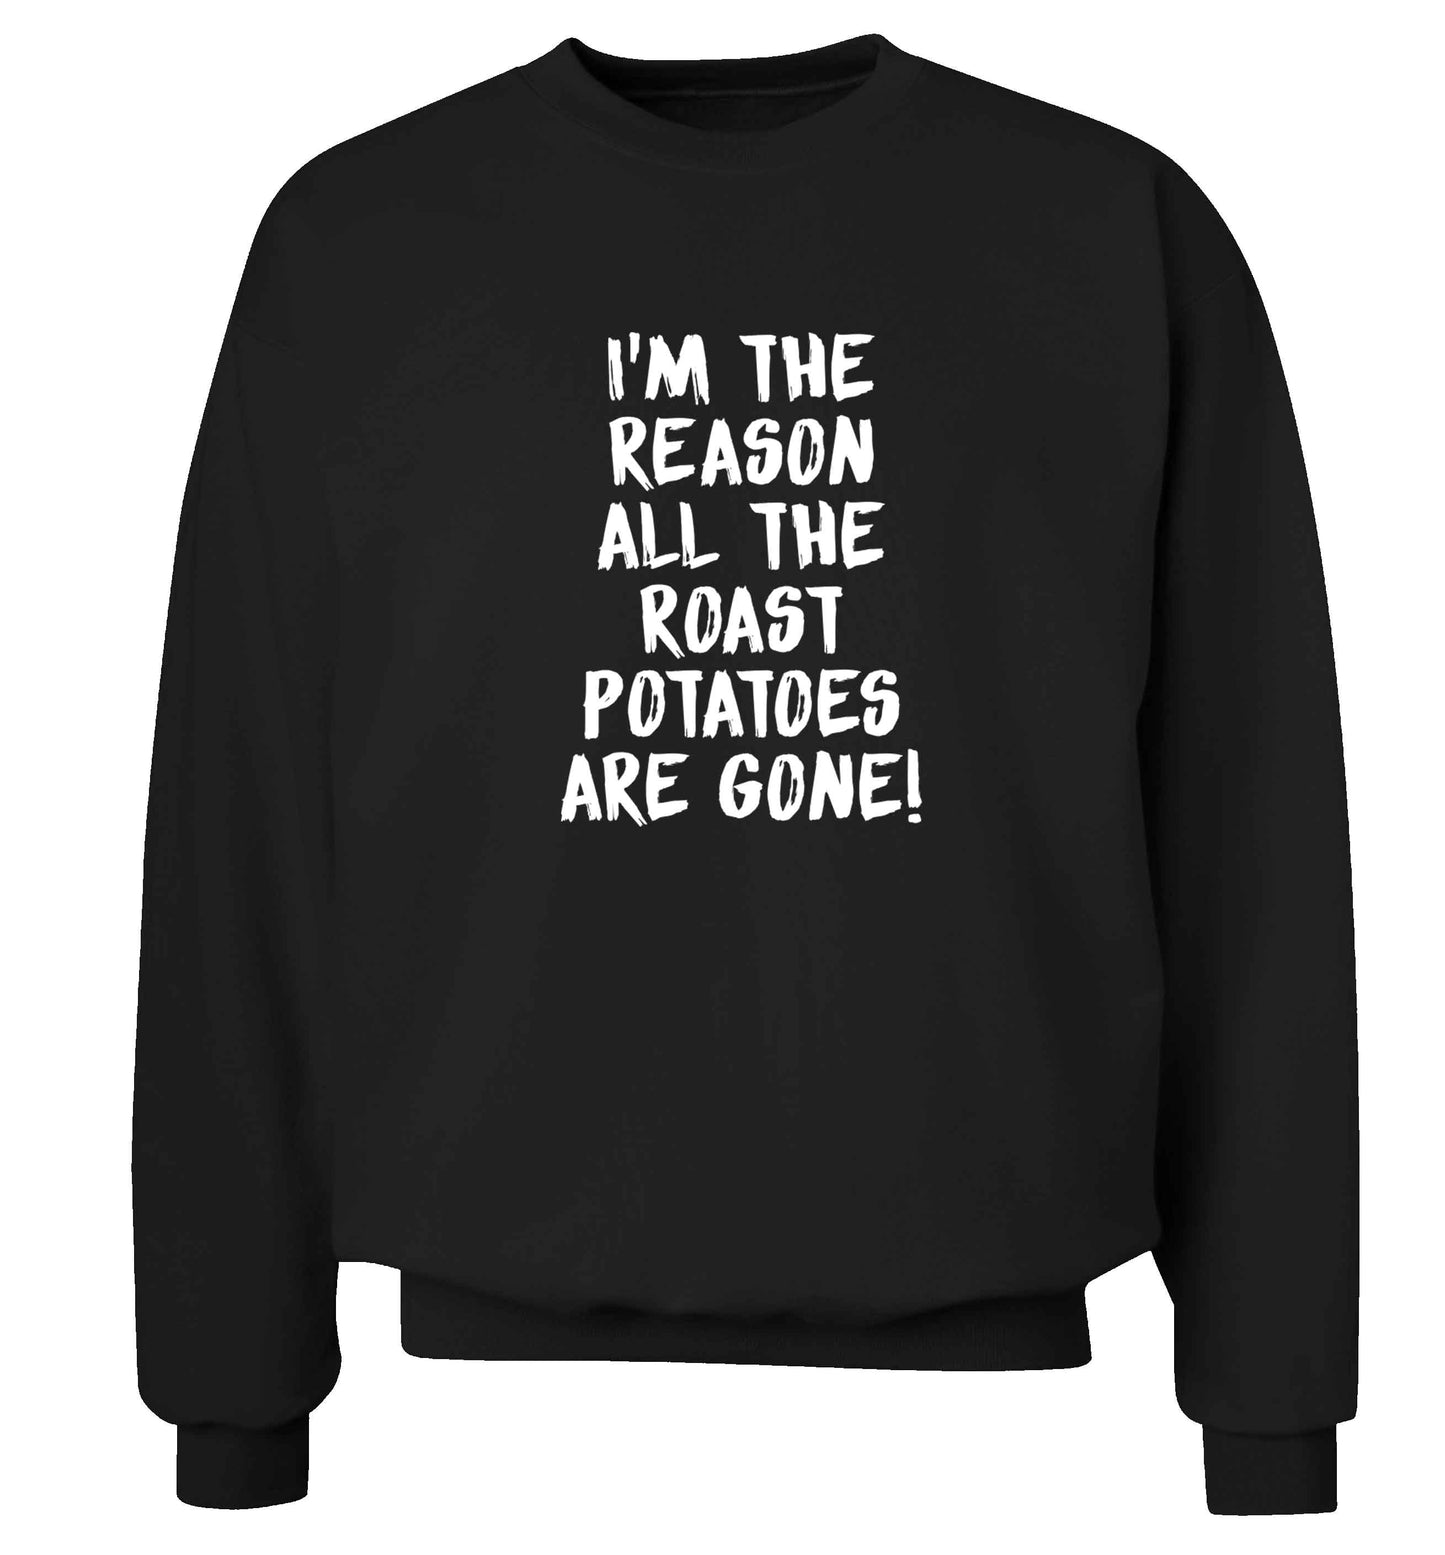 I'm the reason all the roast potatoes are gone adult's unisex black sweater 2XL